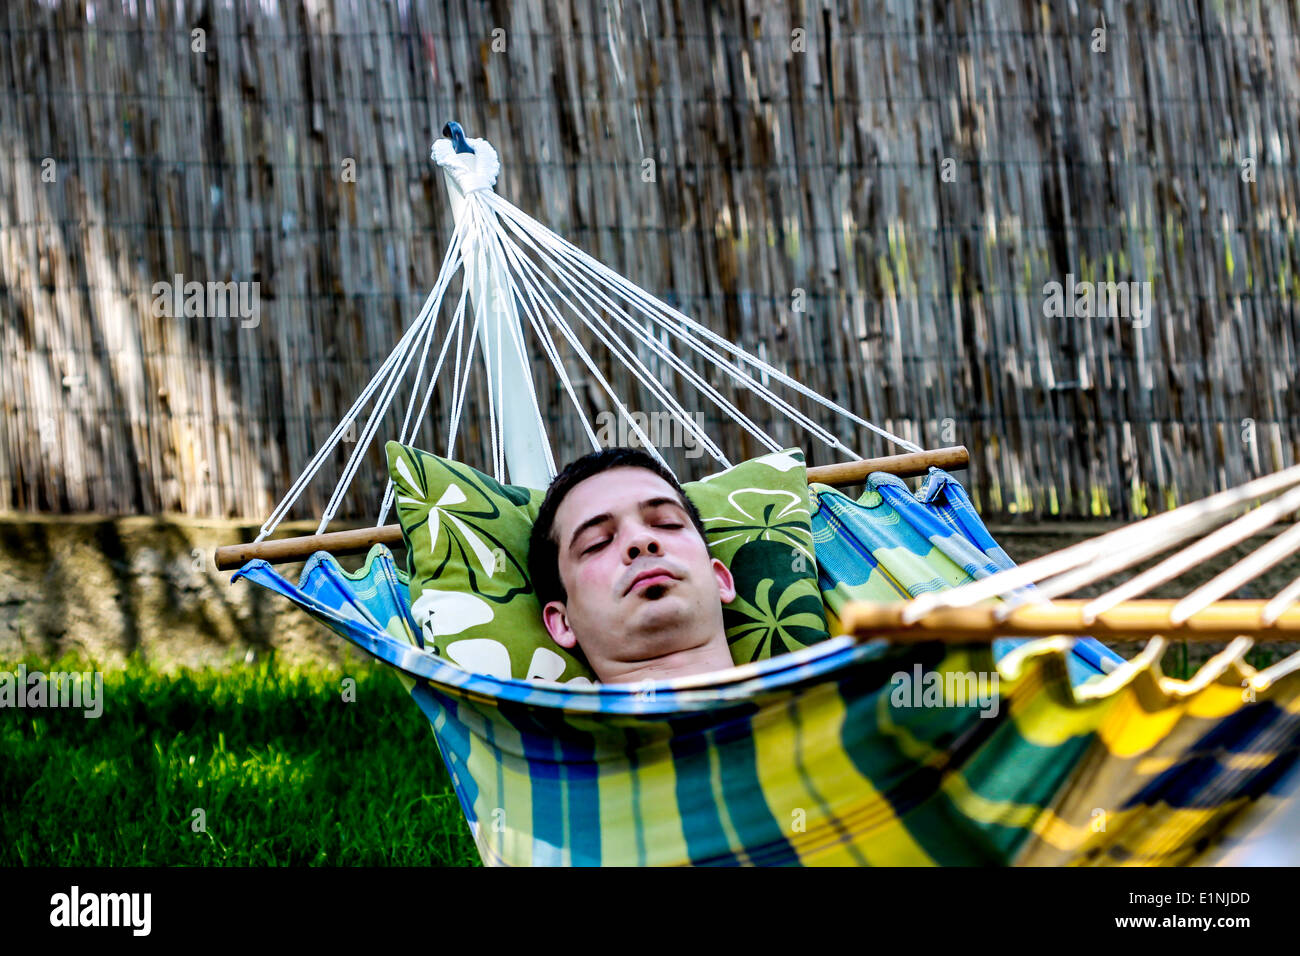 Man napping in a hammock in the garden Stock Photo